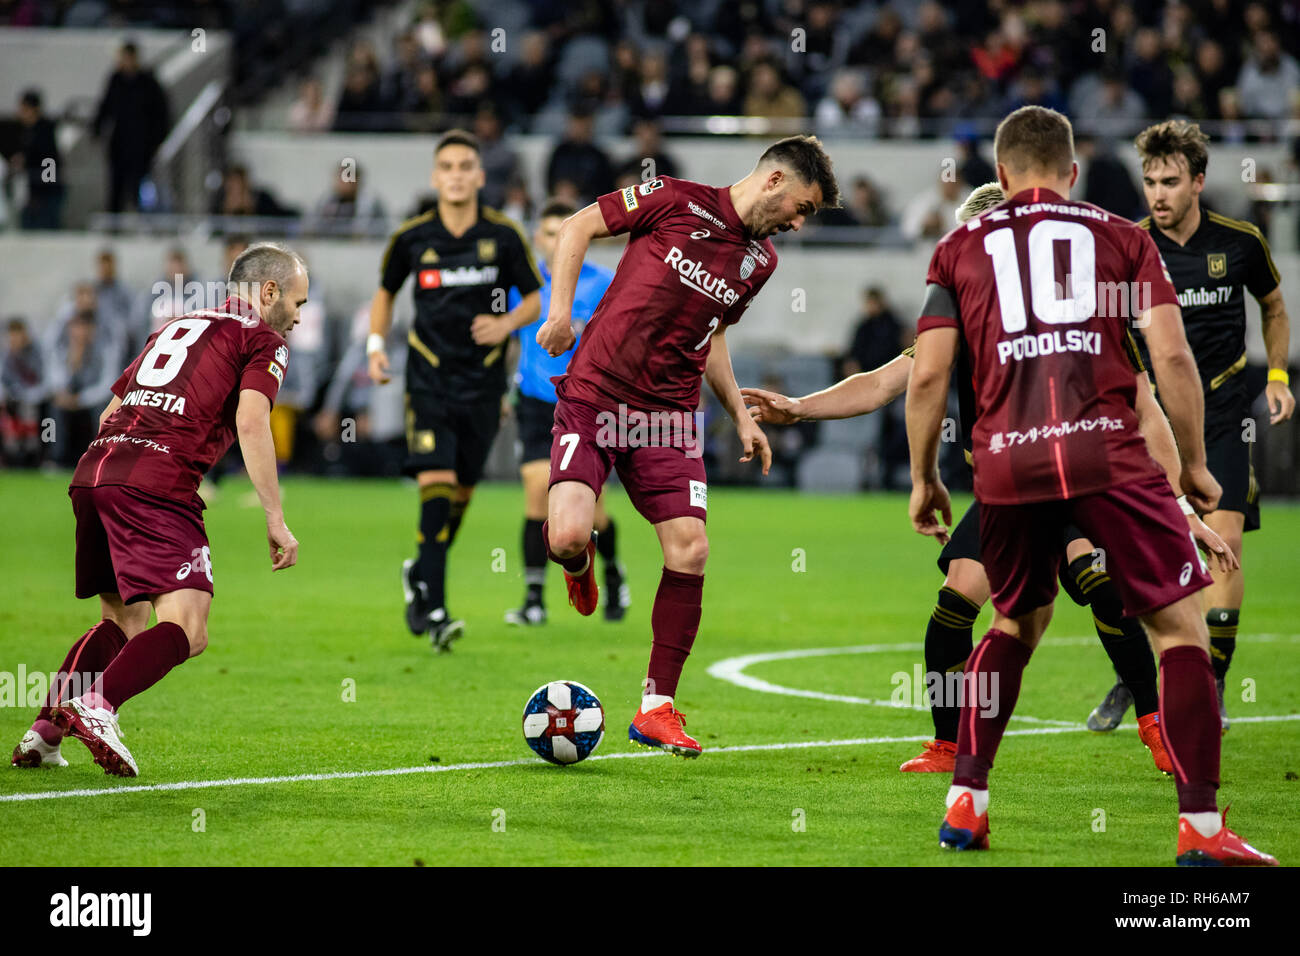 Los Angeles, USA. 31st Jan, 2019. Vissel Kobe's David Villa (7) mixes it up with teammates Andrés Iniesta (8) and Lukas Podolski (10) during the second half of their match against LAFC. Credit: Ben Nichols/Alamy Live News Stock Photo